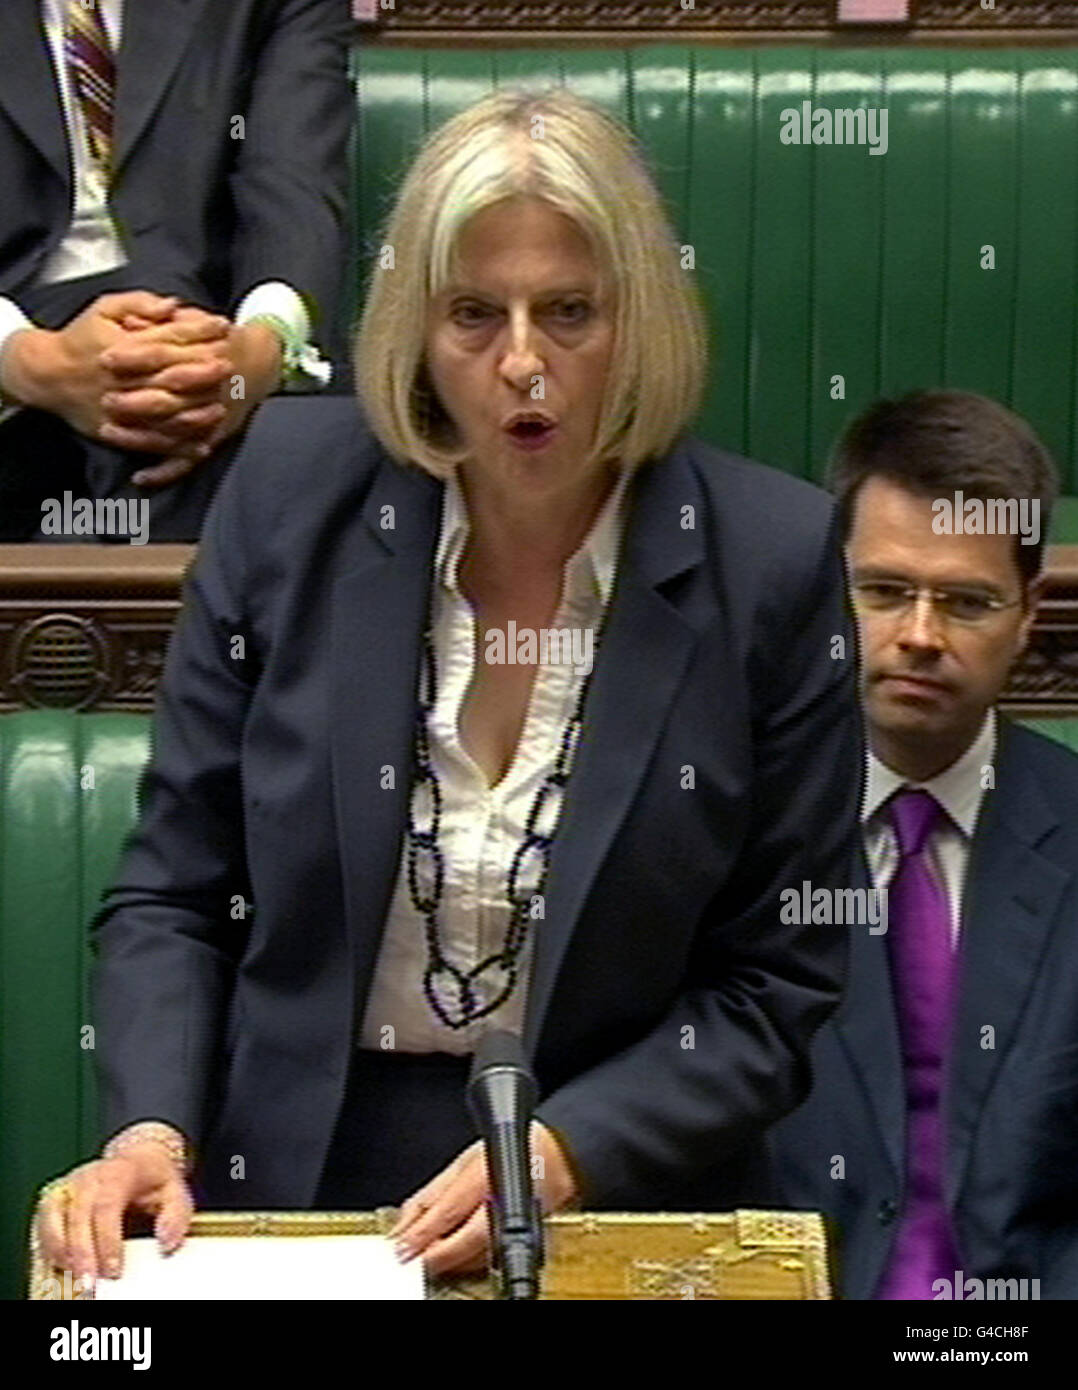 Home Secretary Theresa May speaks in the House of Commons in London, after it was announced that a US-style National Crime Agency will replace the Serious Organised Crime Agency (Soca), which itself was heralded as 'Britain's FBI' when it was launched by Labour in 2006. Stock Photo